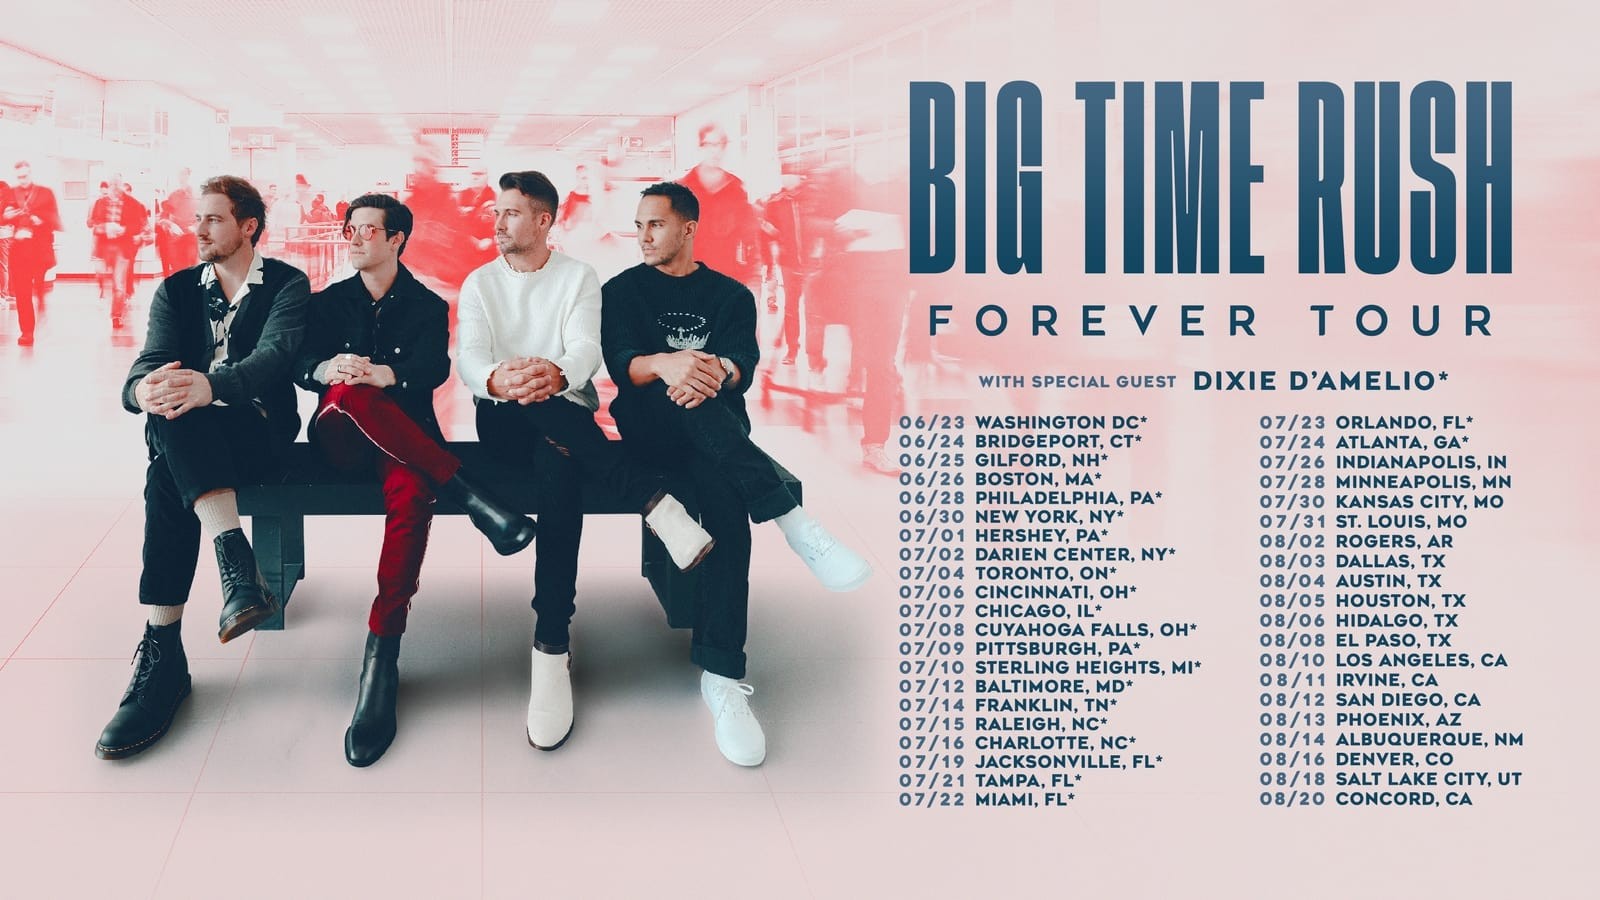 Big Time Rush plays UCF's Addition Financial Arena in July Orlando